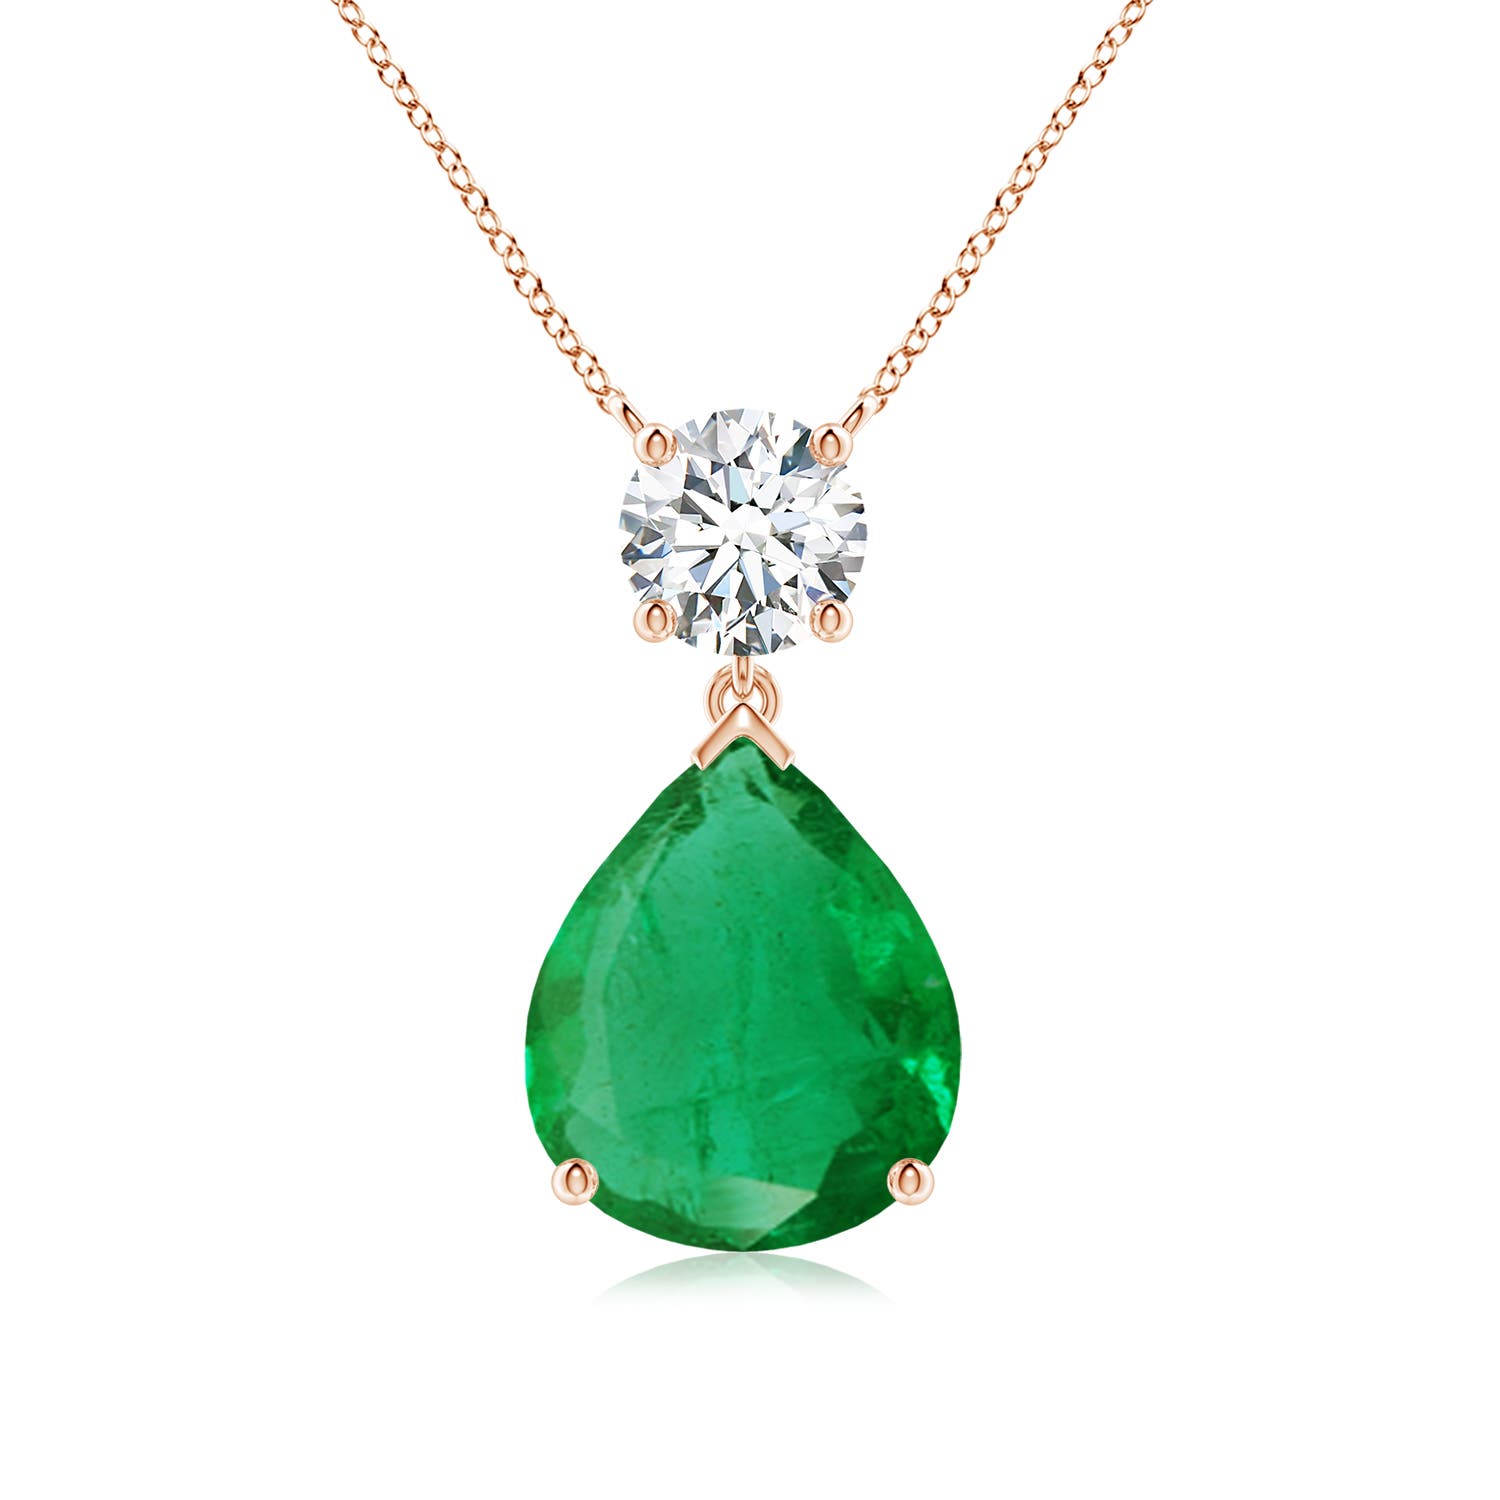 AA - Emerald / 5.21 CT / 14 KT Rose Gold